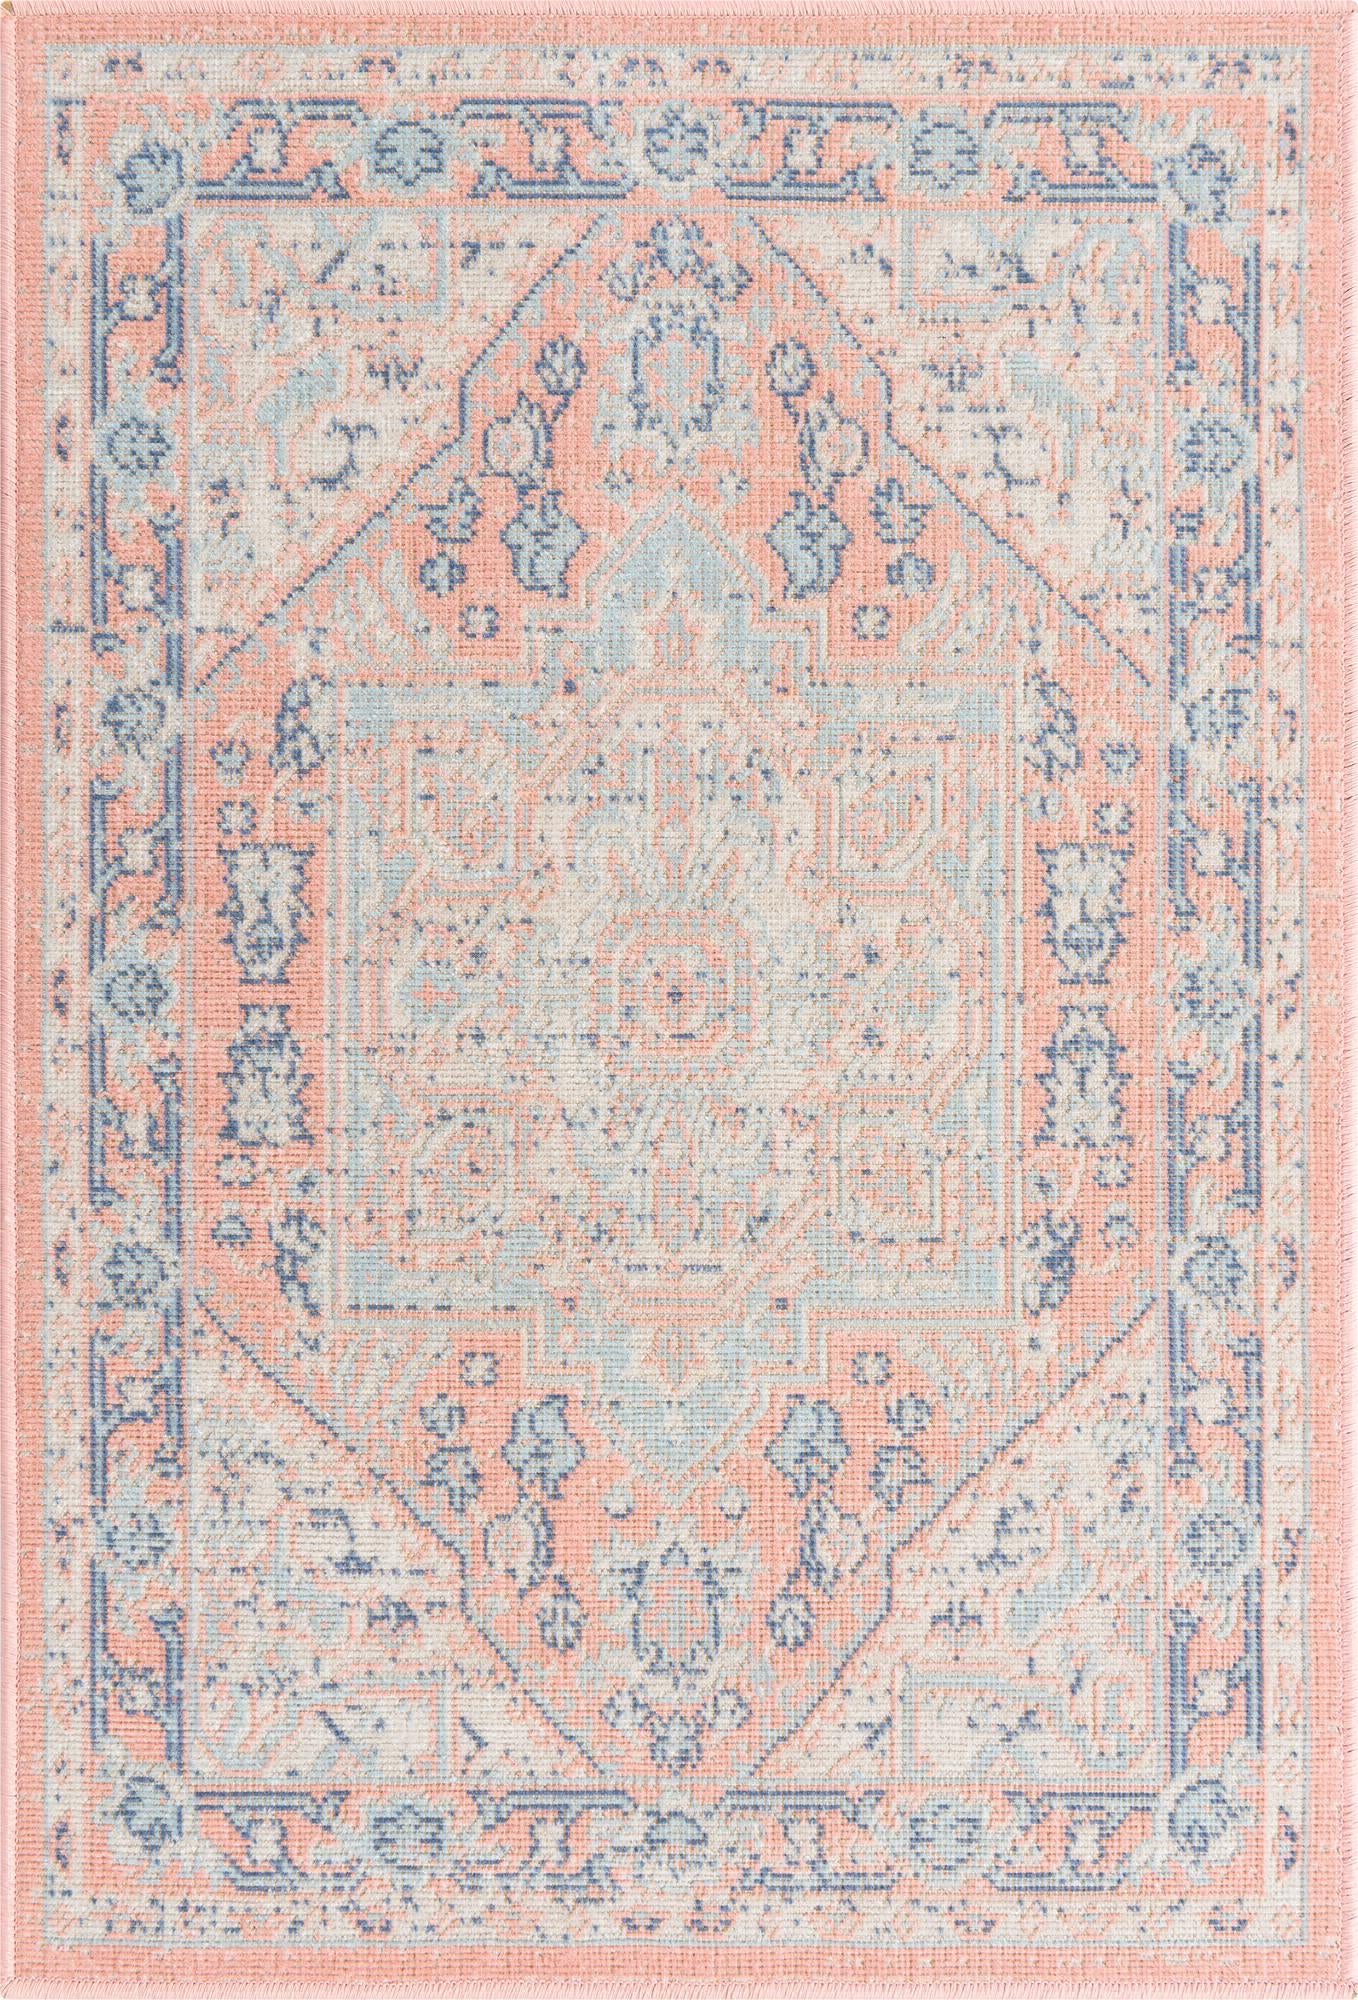 Unique Loom Whitney T-WHIT1 Powder Pink Area Rug main image